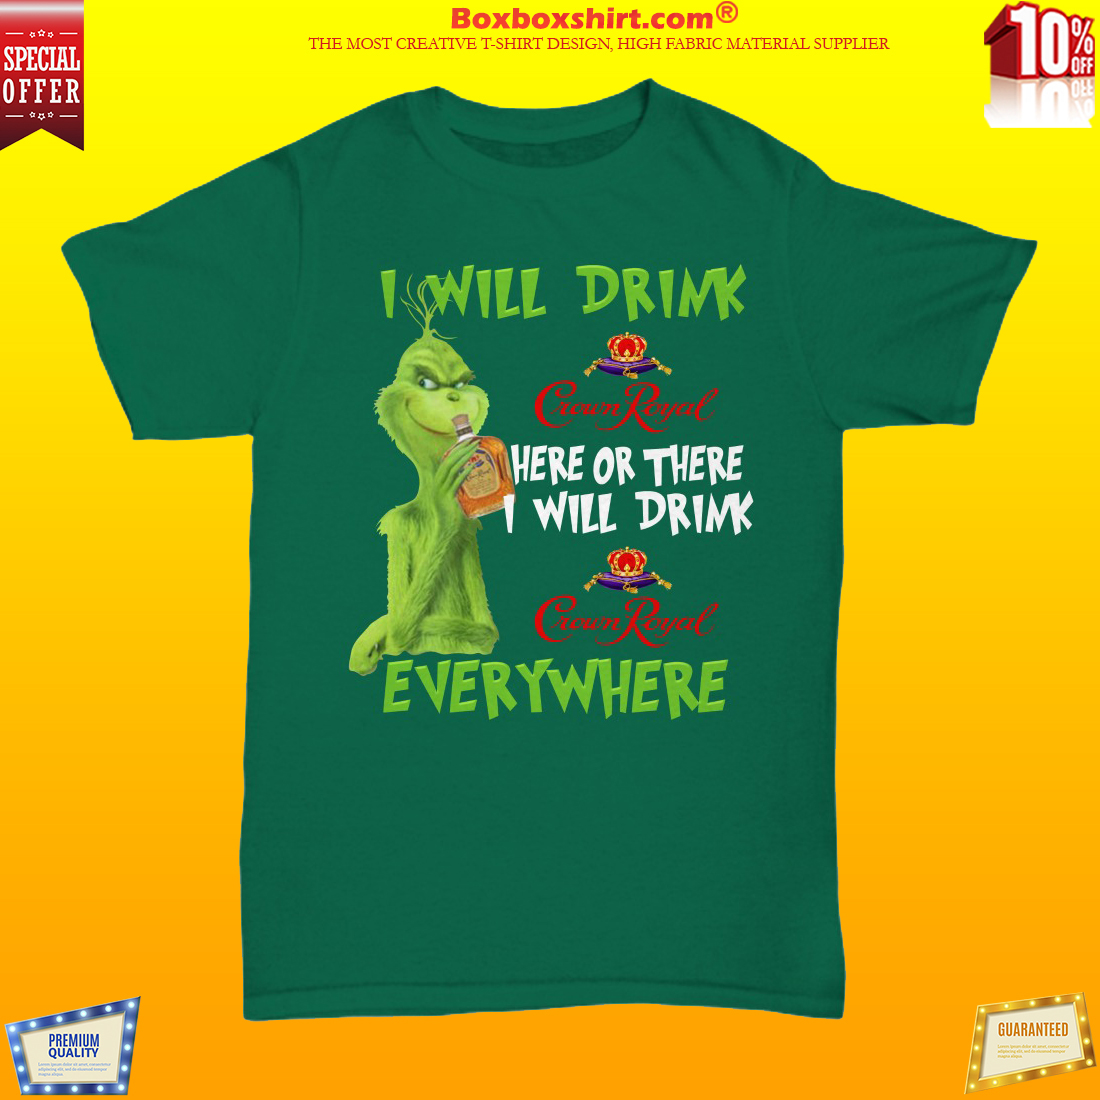 Grinch I will drink Crown Royal here there everywhere shirt 